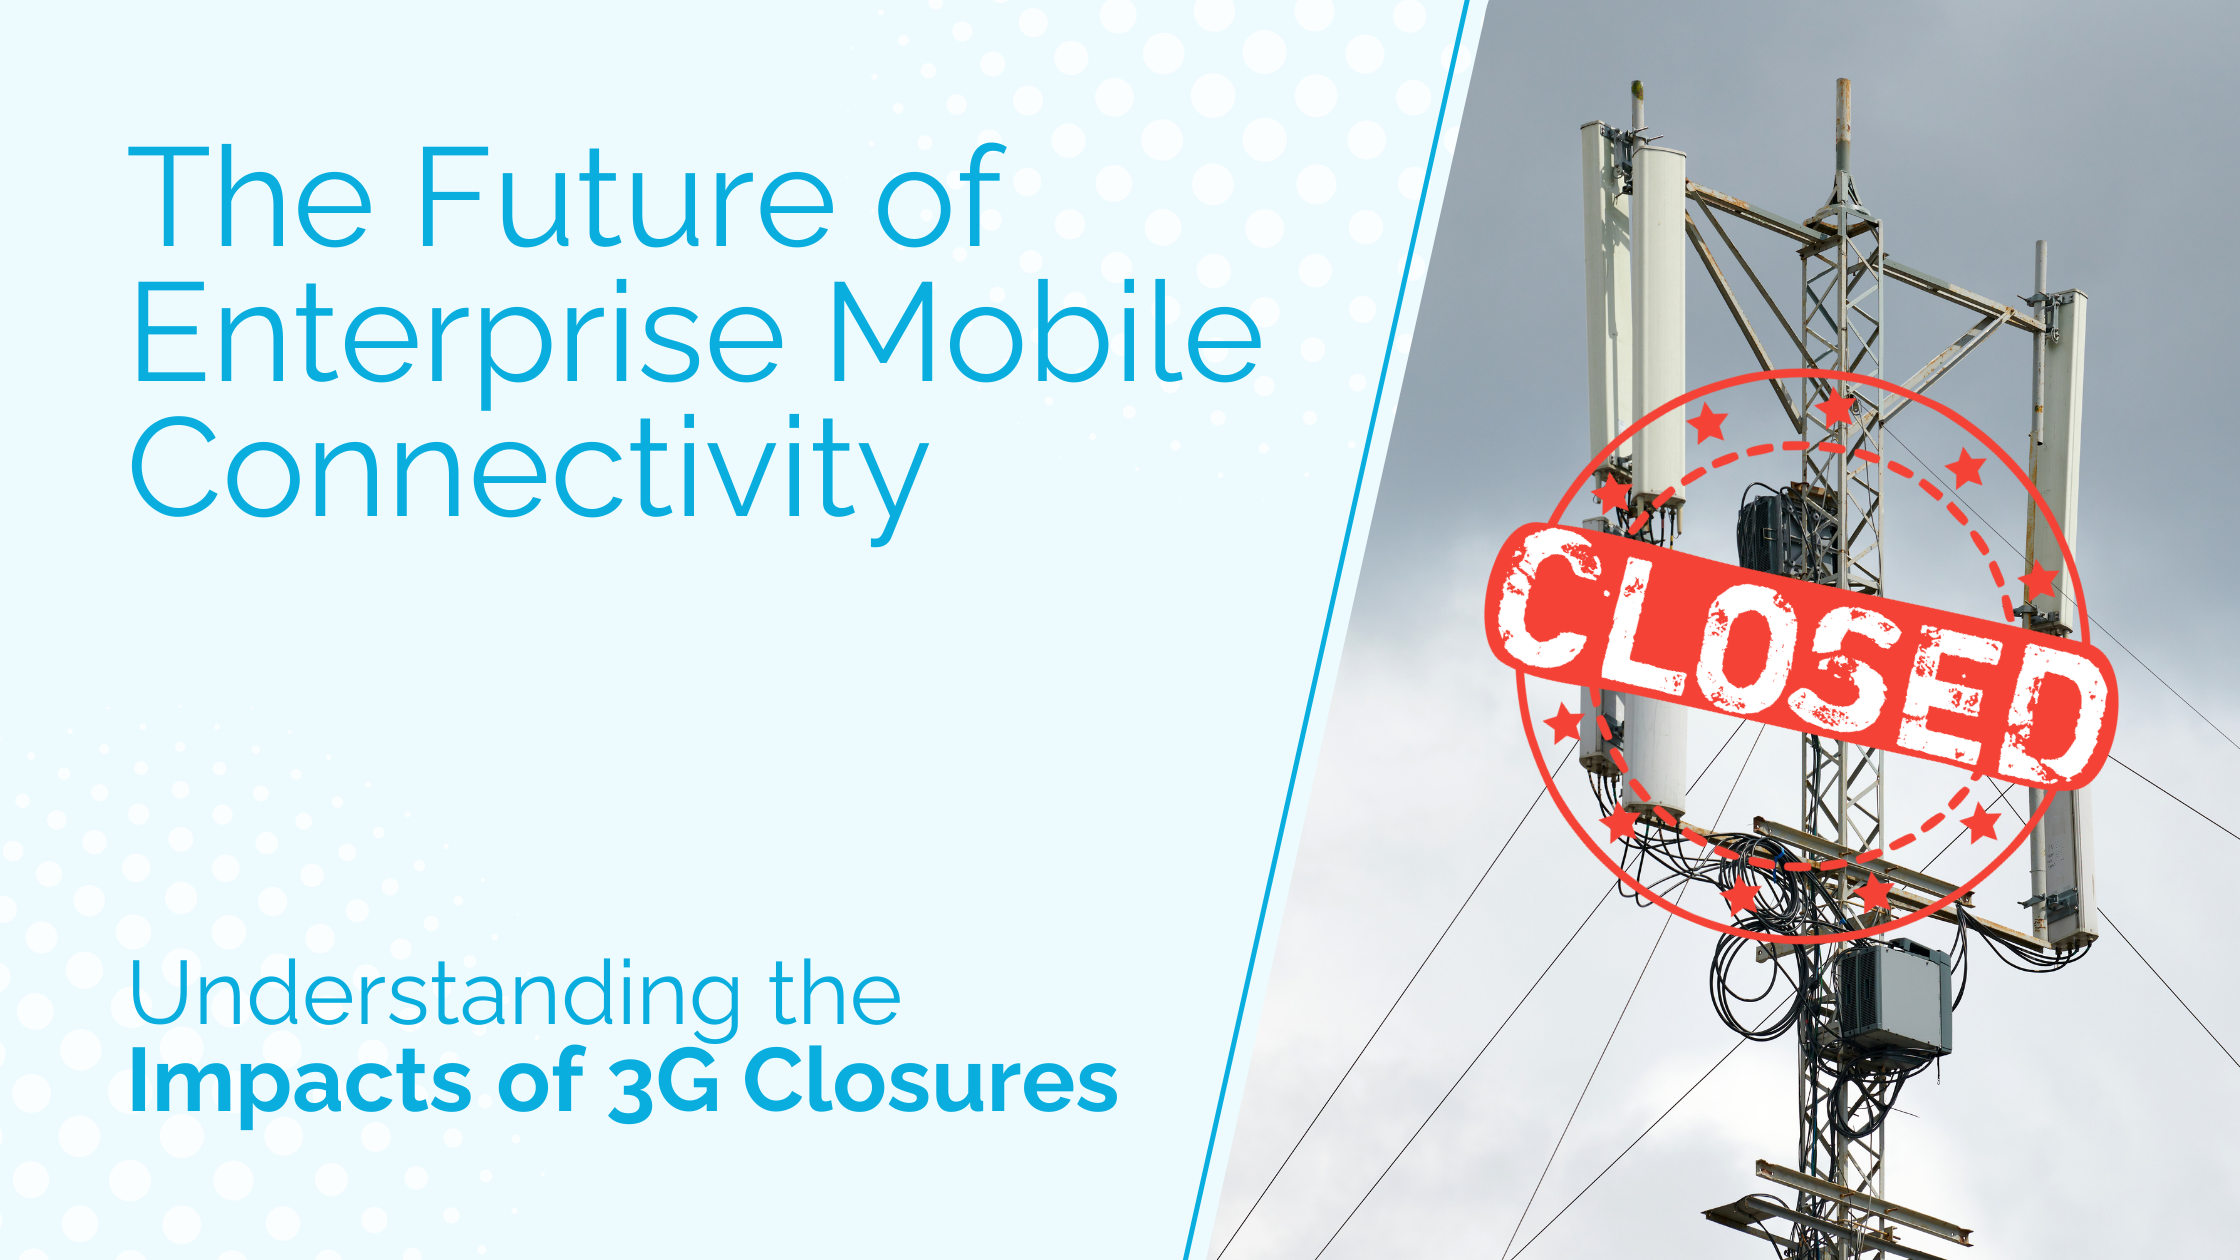 The Future of Enterprise Mobile Connectivity: Understanding the Impacts of 3G Closures